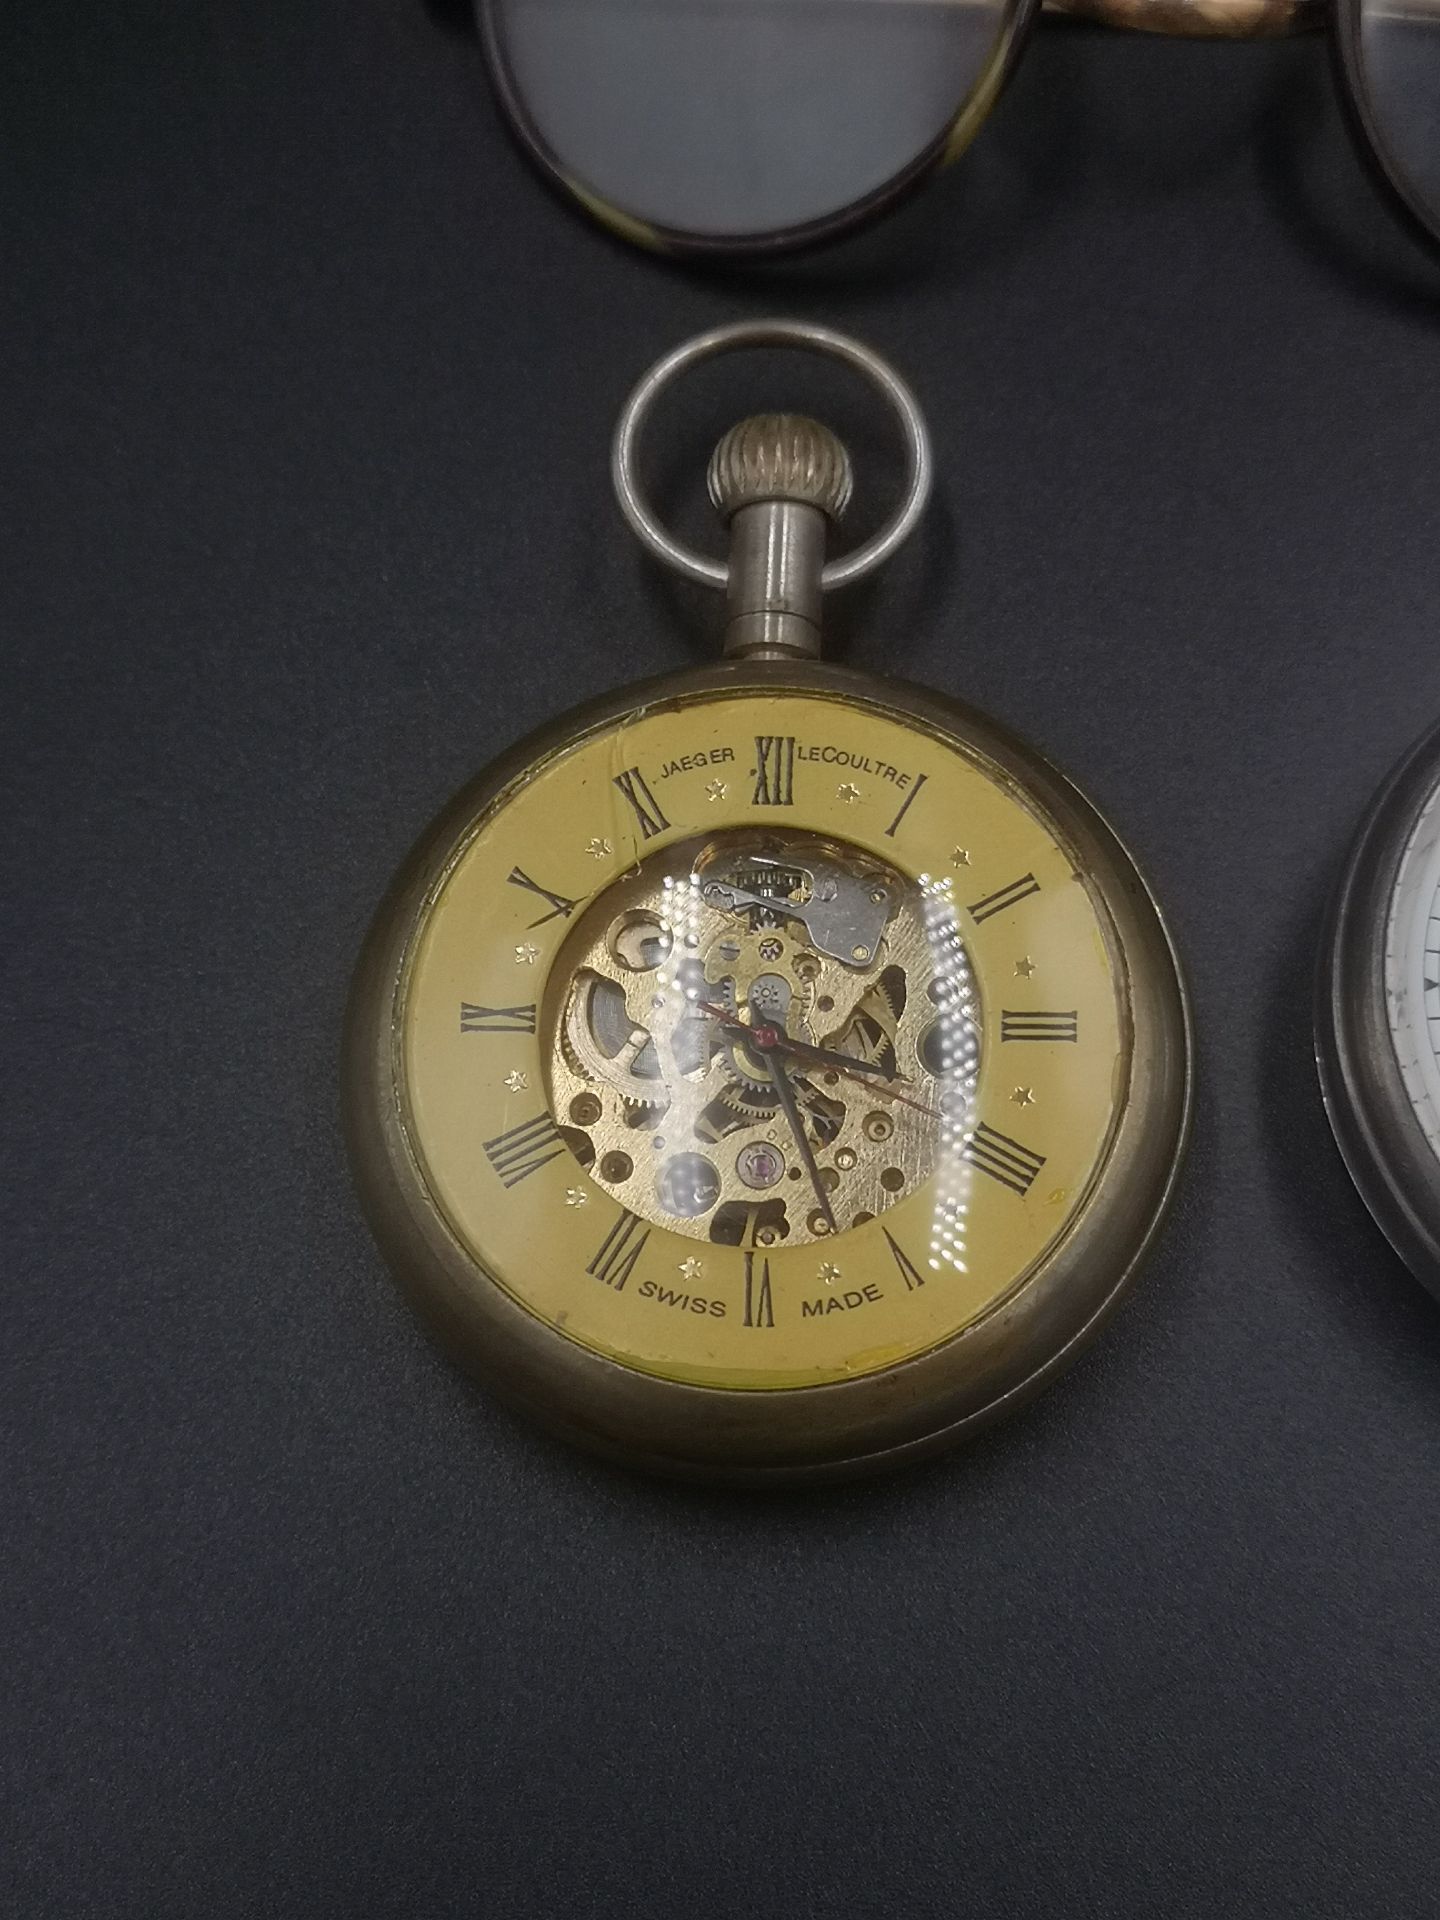 Waltham silver cased pocket watch; a pocket watch; rolled gold pair of spectacles - Image 2 of 7